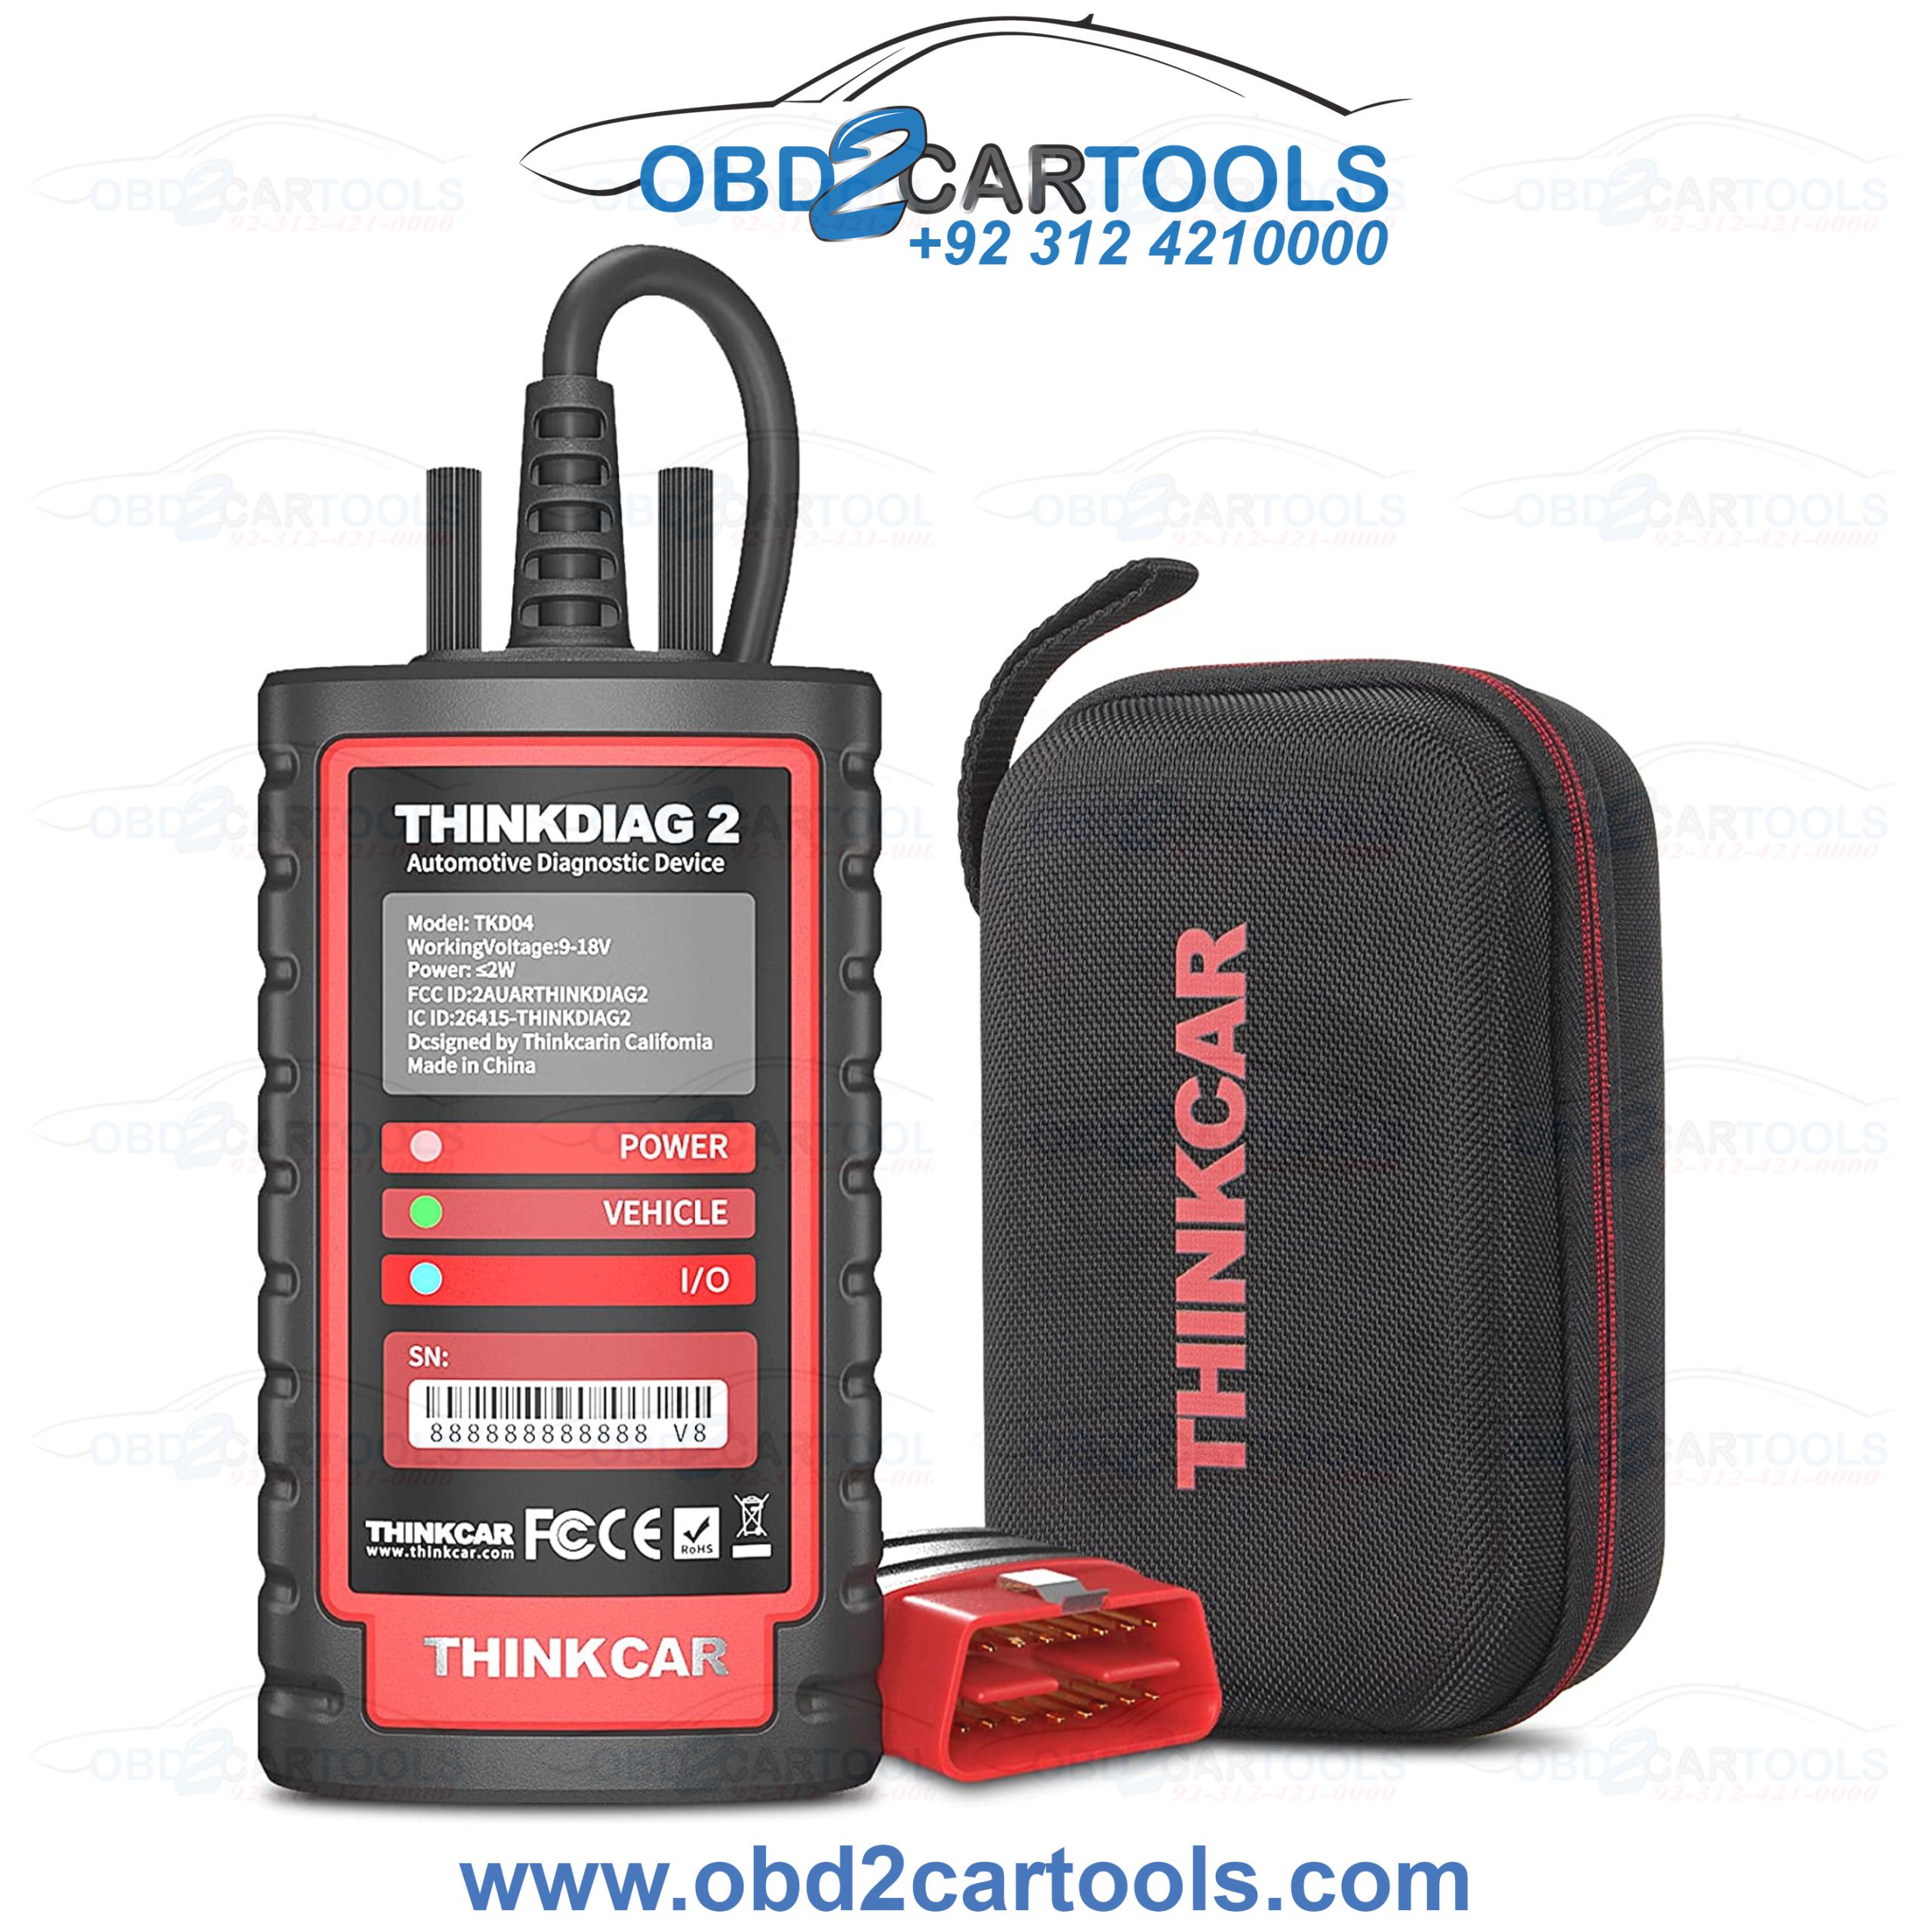 Product image for Thinkdiag2 All System OBD2 Diagnostic Scanner with CAN-FD Protocol, AutoVIN, Active Test, 15+ Reset Functions